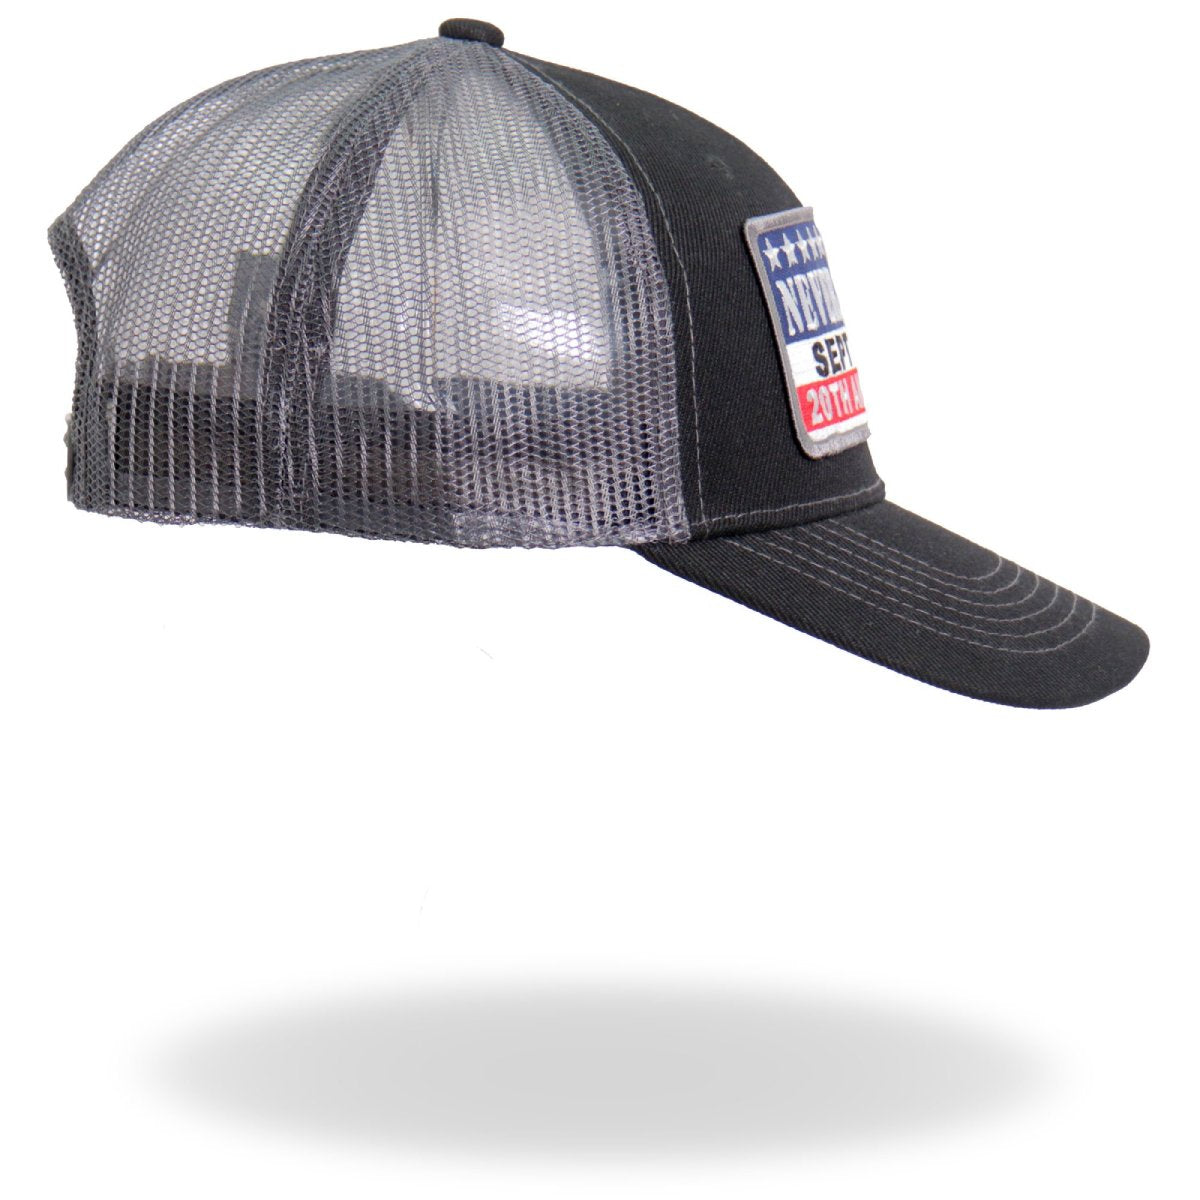 Hot Leathers GSH1038 9-11 Never Forget Truckers Hat